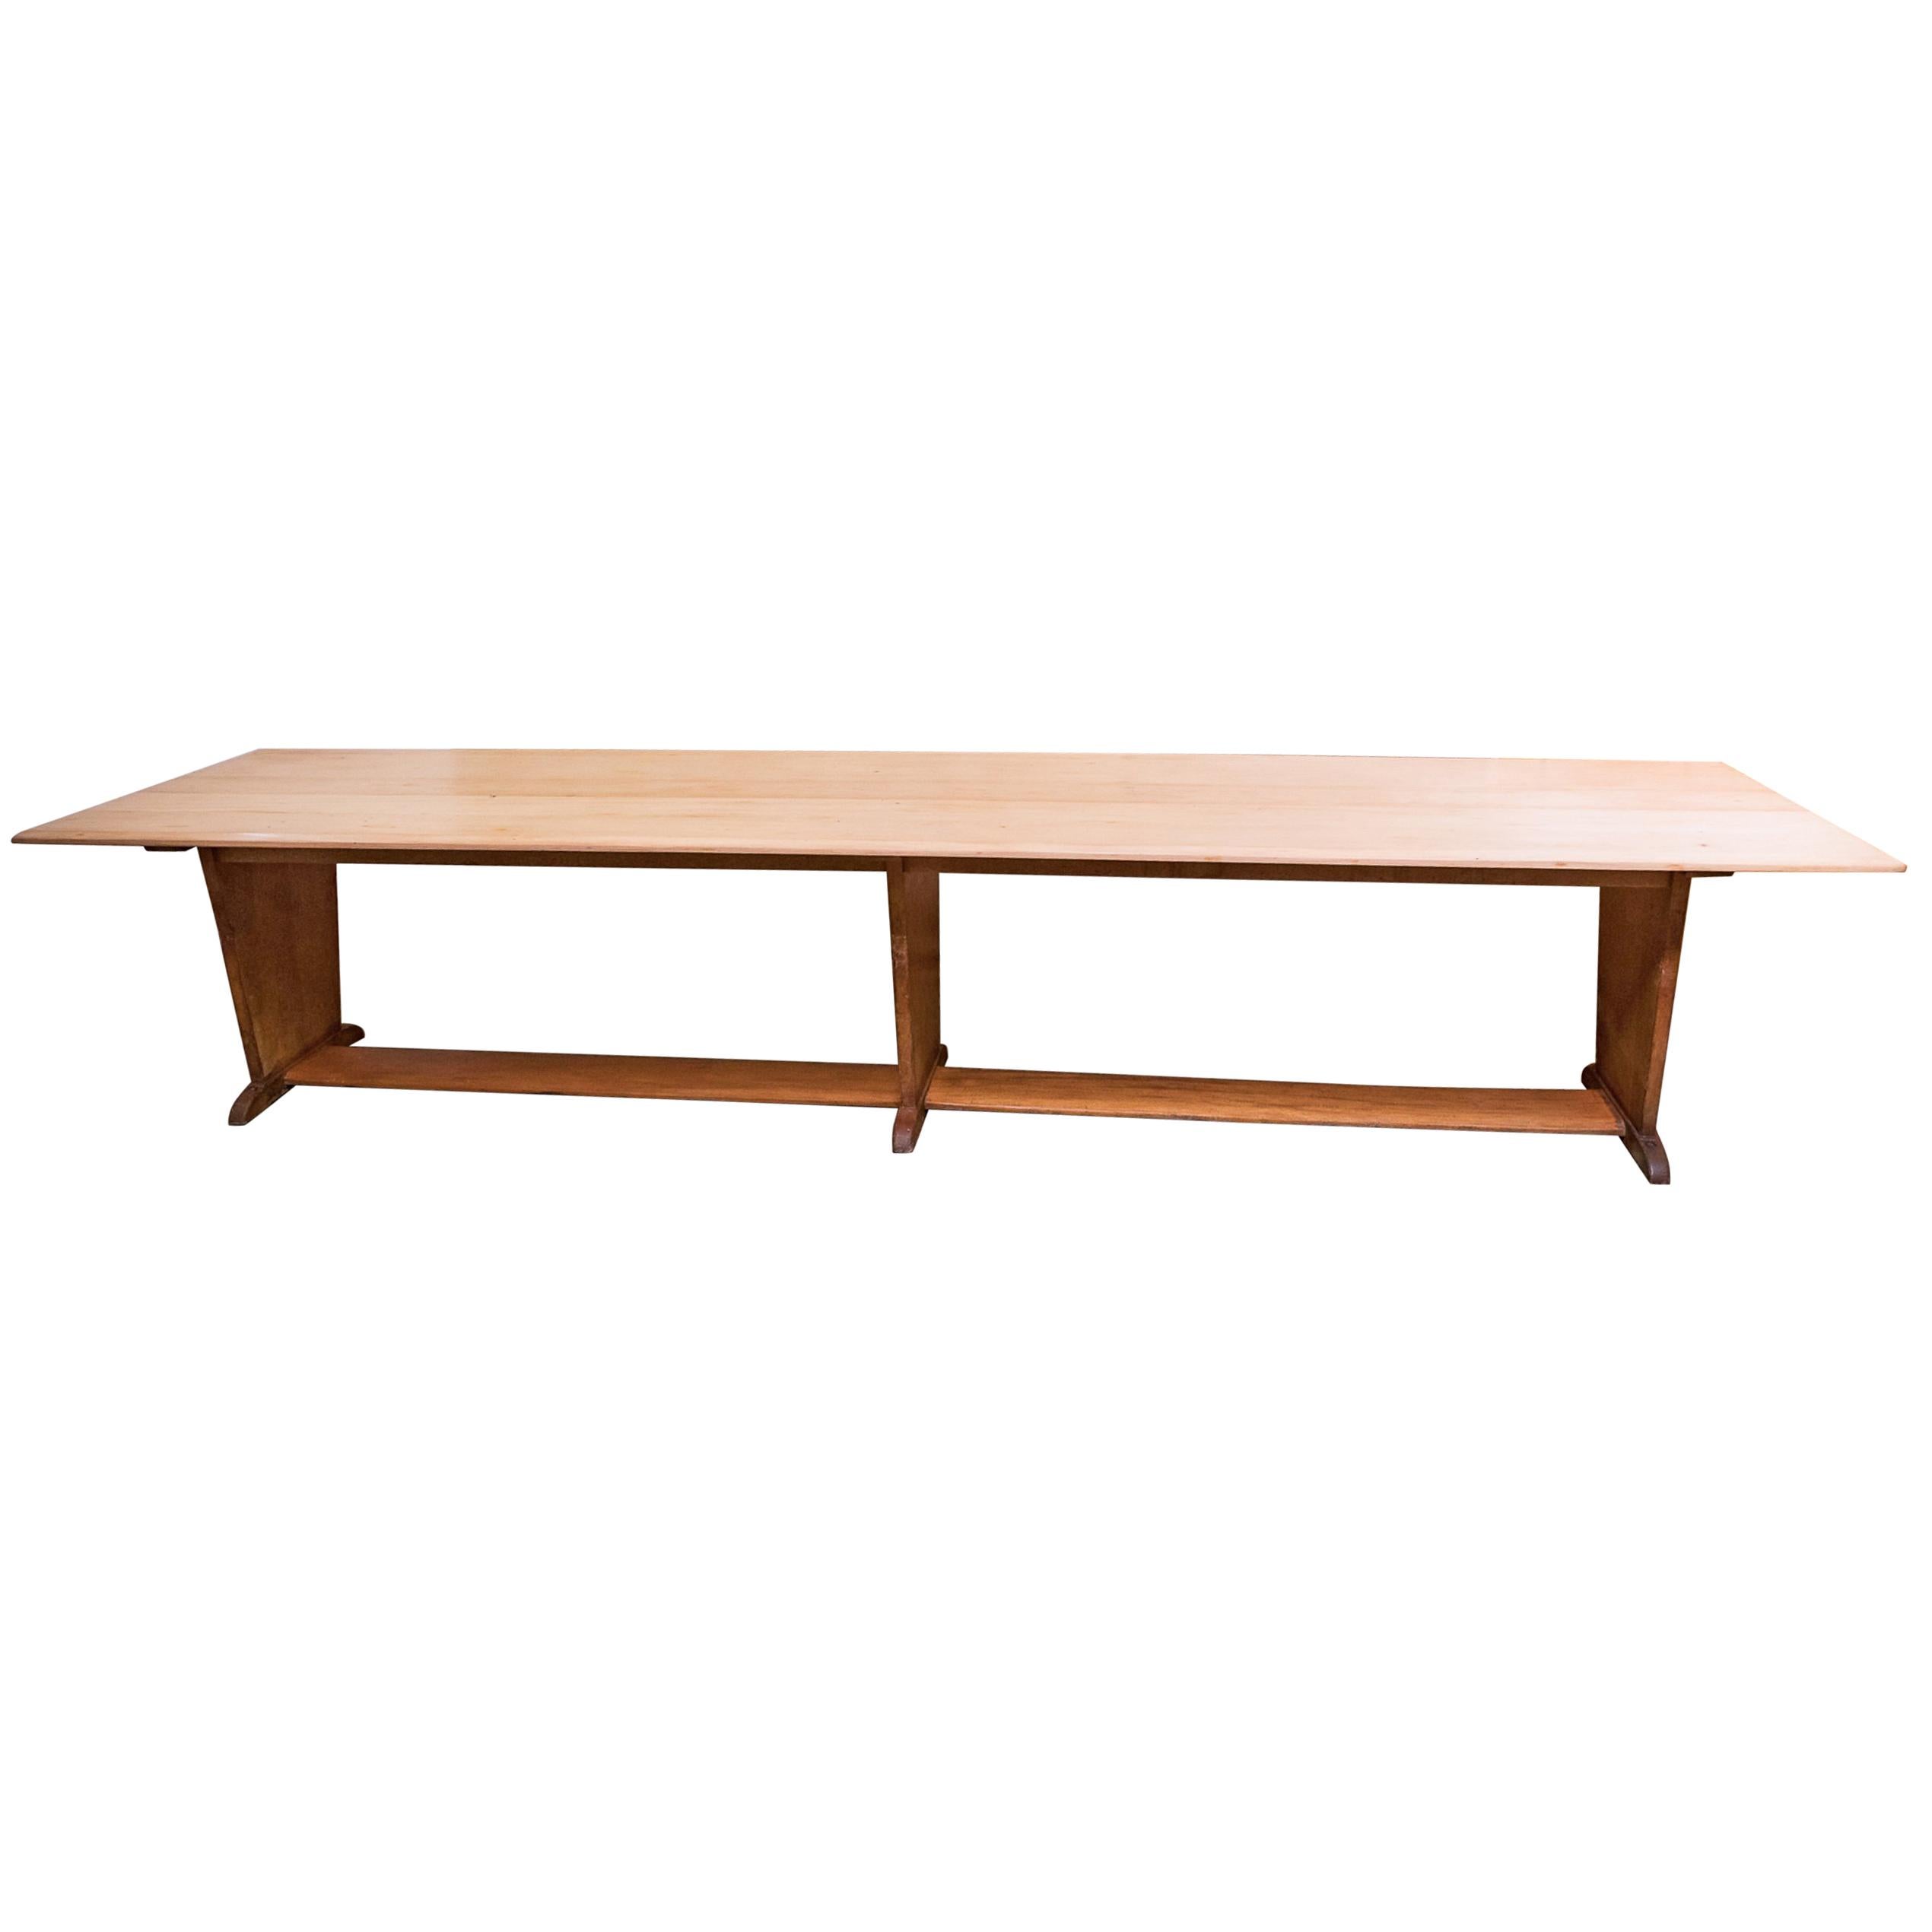 Very Large Light Beech Wood Dining / Refectory Table For Sale